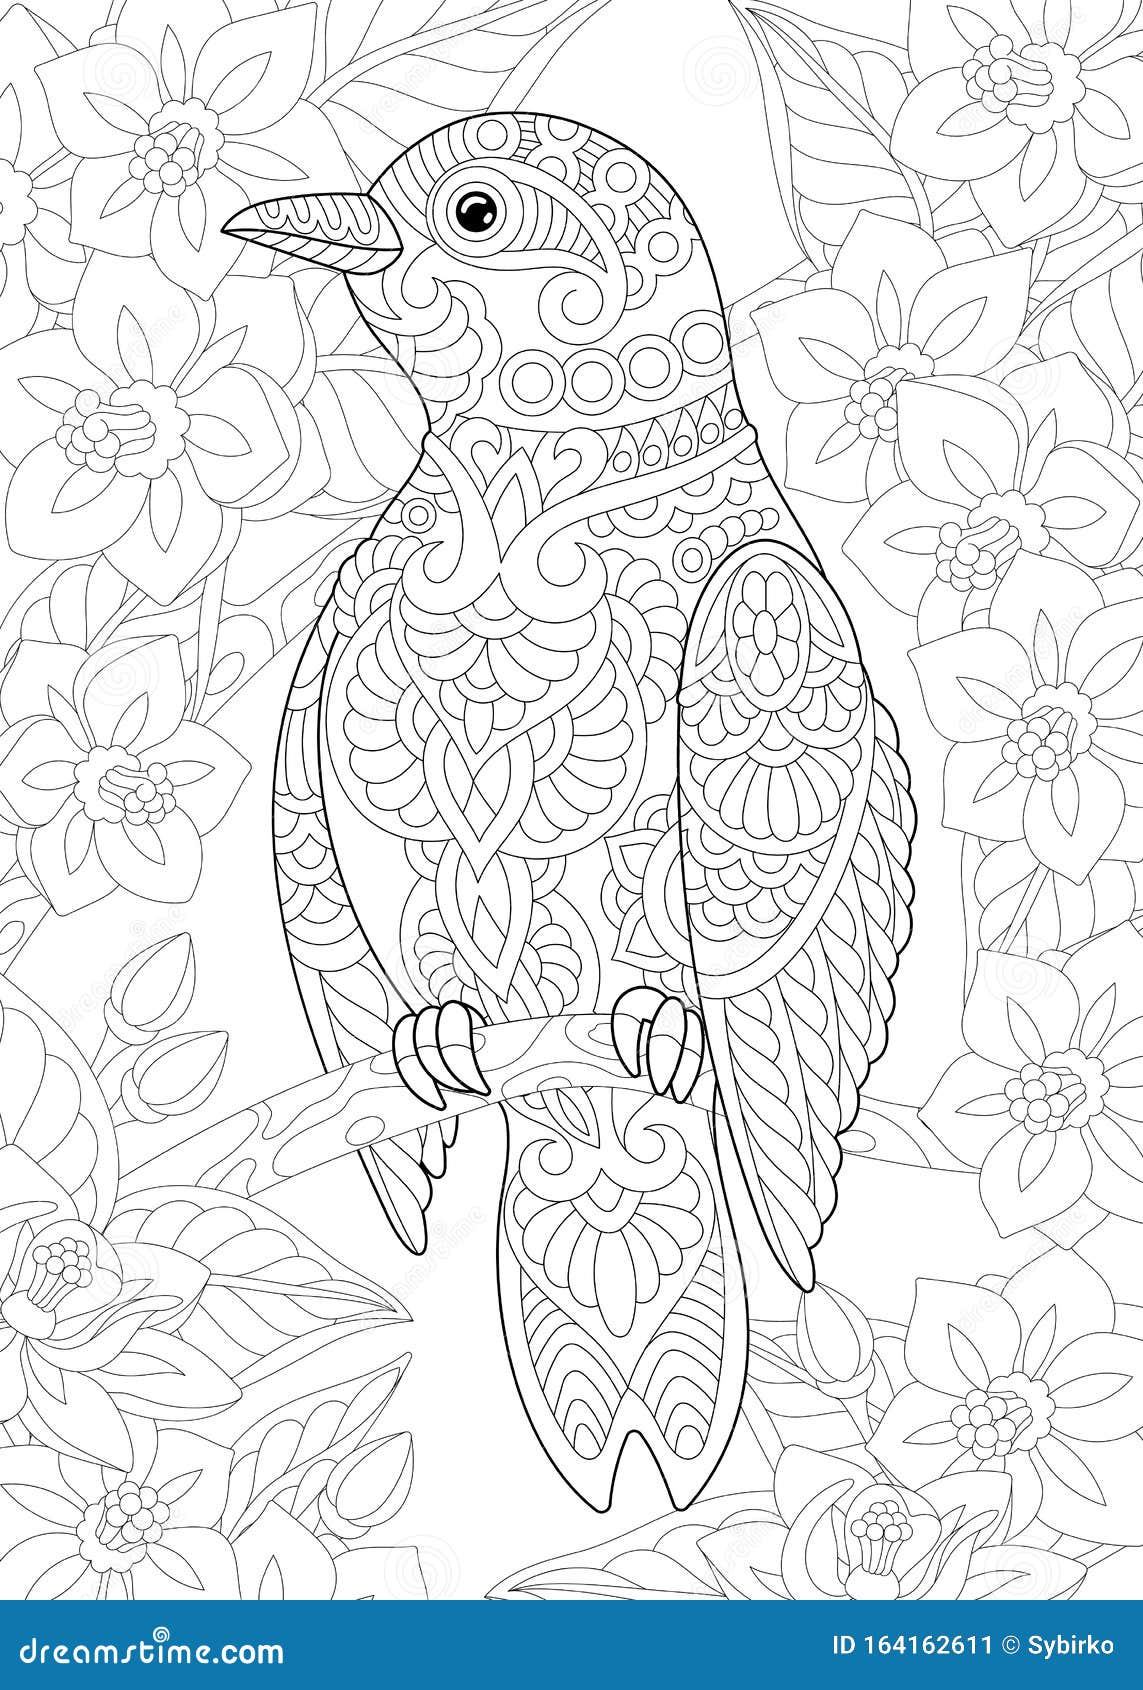 Coloring Page with Bird in the Garden Stock Vector   Illustration ...